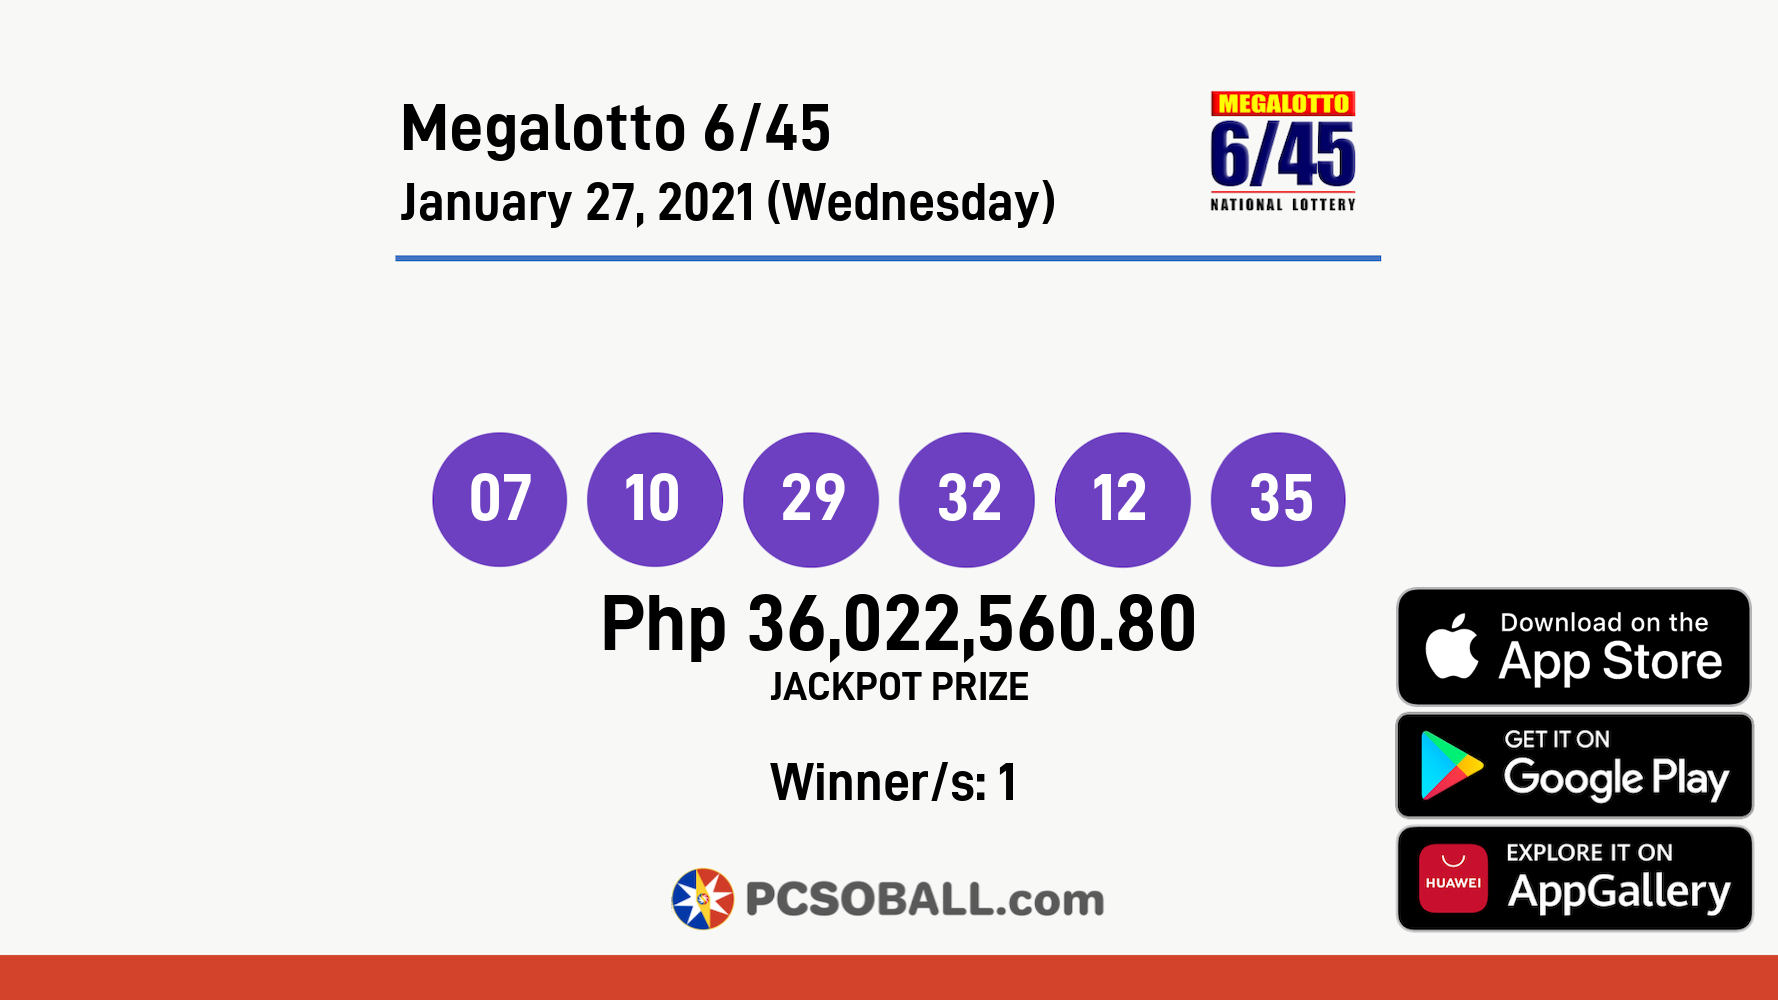 Megalotto 6/45 January 27, 2021 (Wednesday) Result